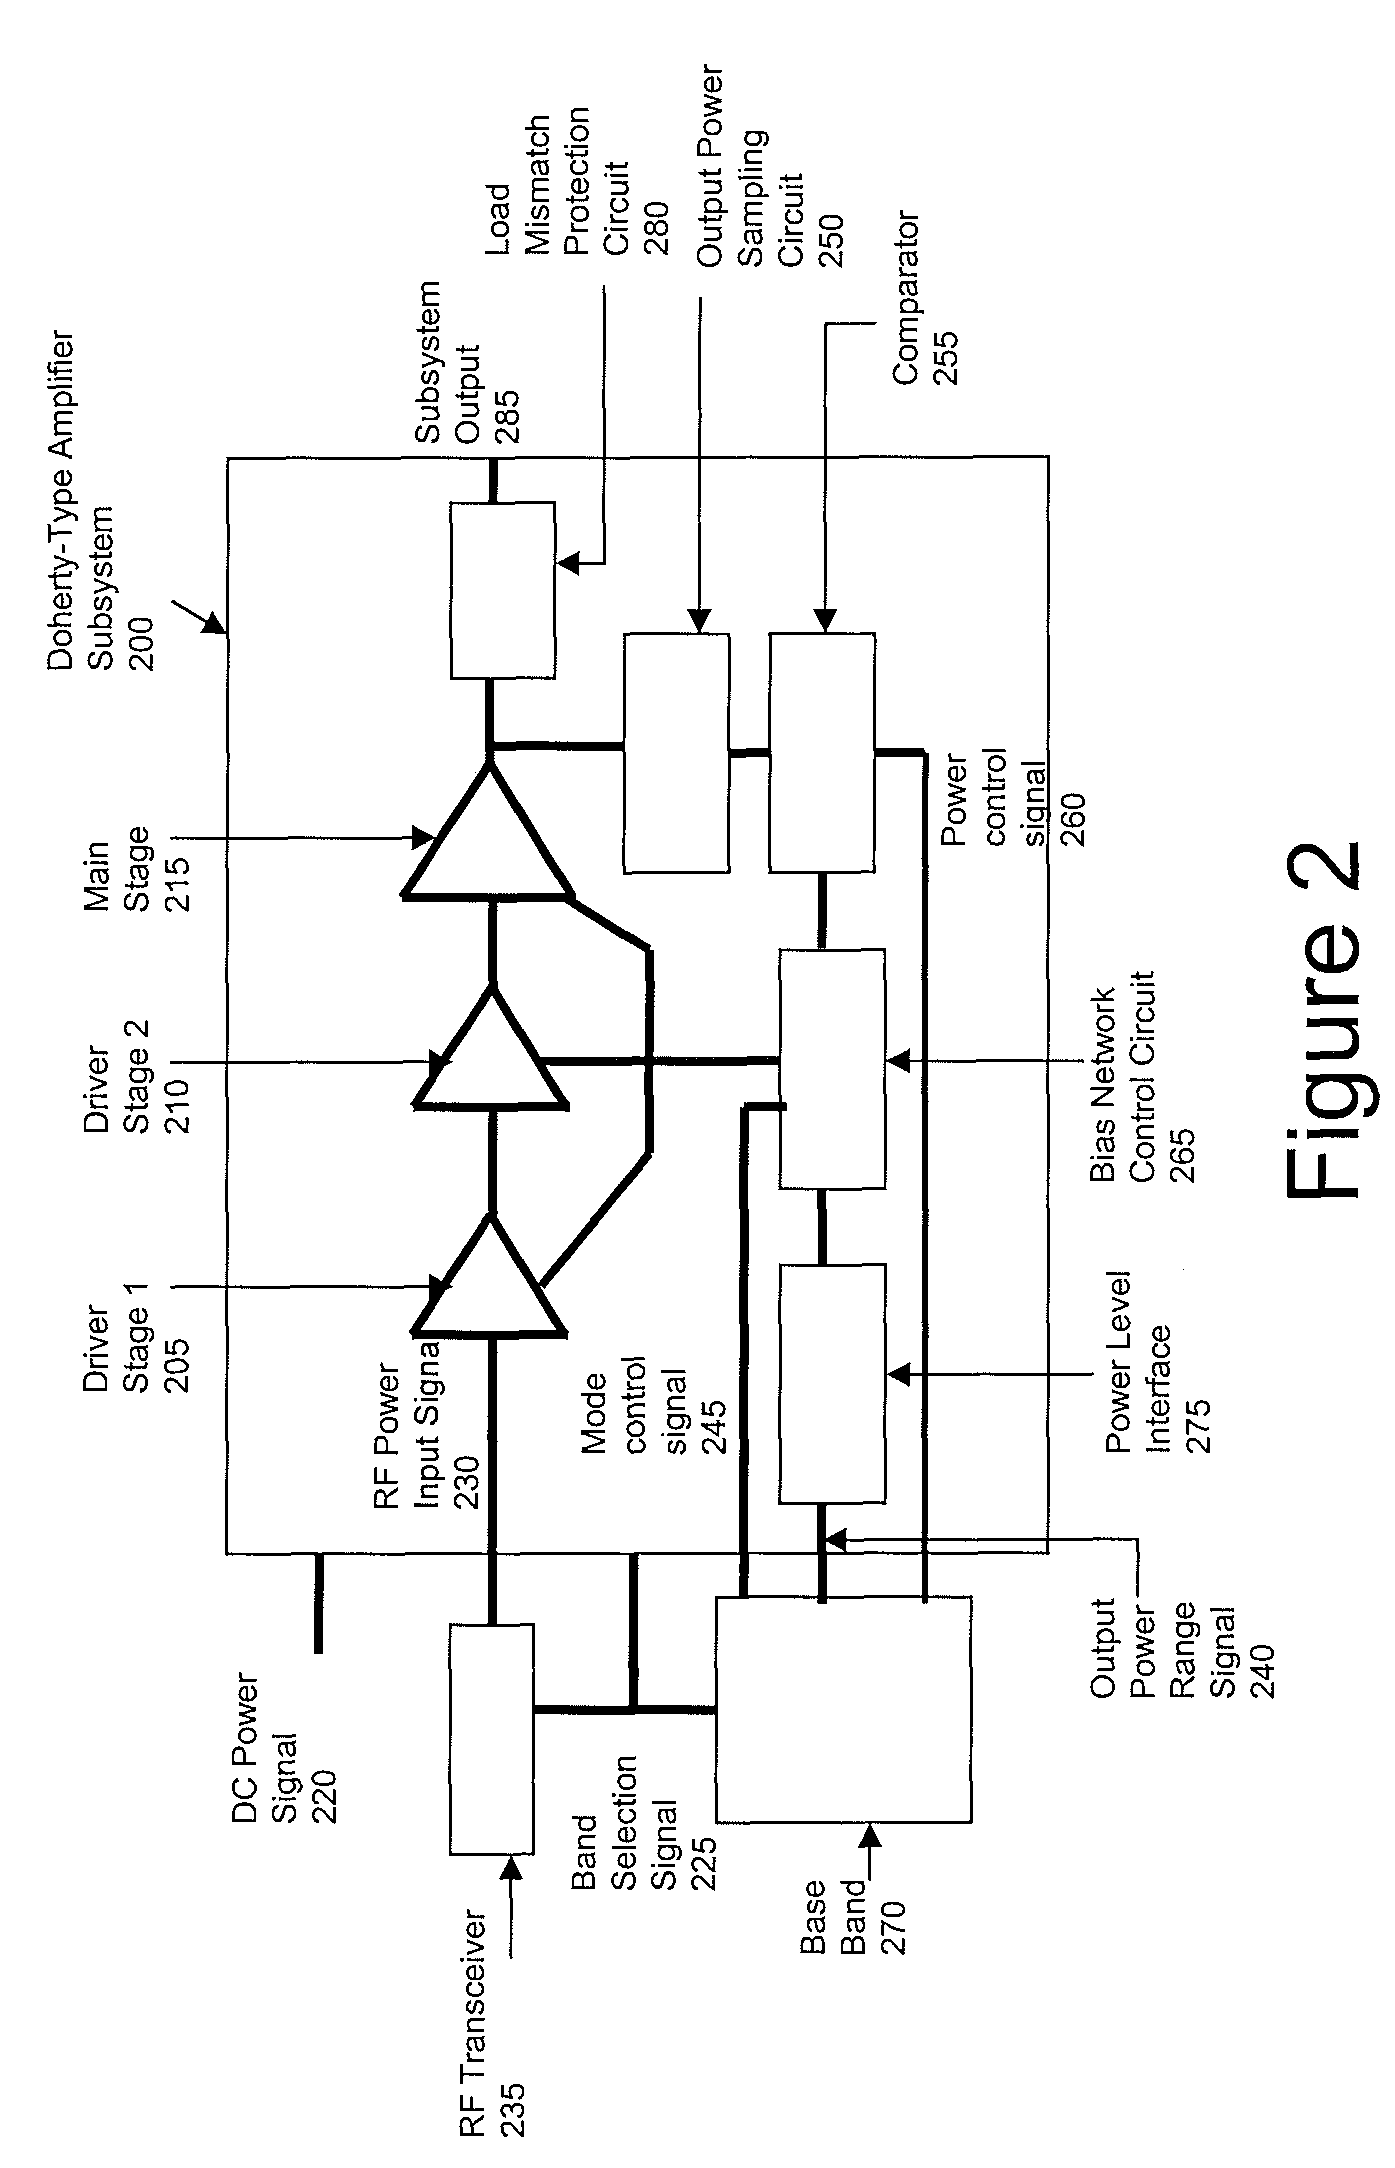 Method and apparatus of Doherty-type power amplifier subsystem for wireless communications systems